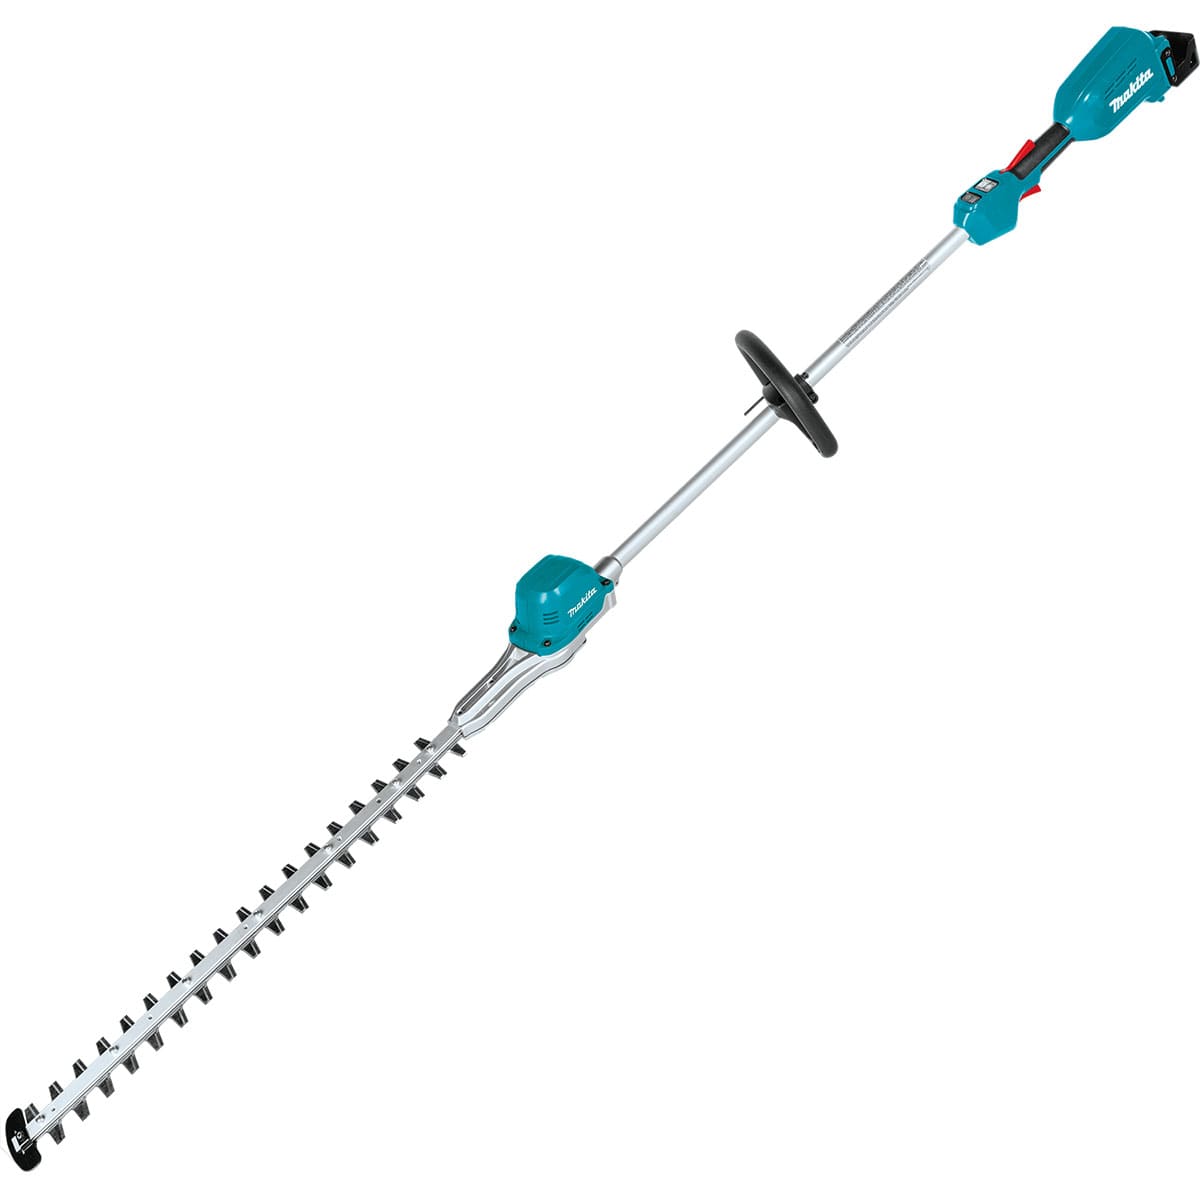 Makita XNU02Z 18V LXT 24" Pole Hedge Trimmer, Tool Only